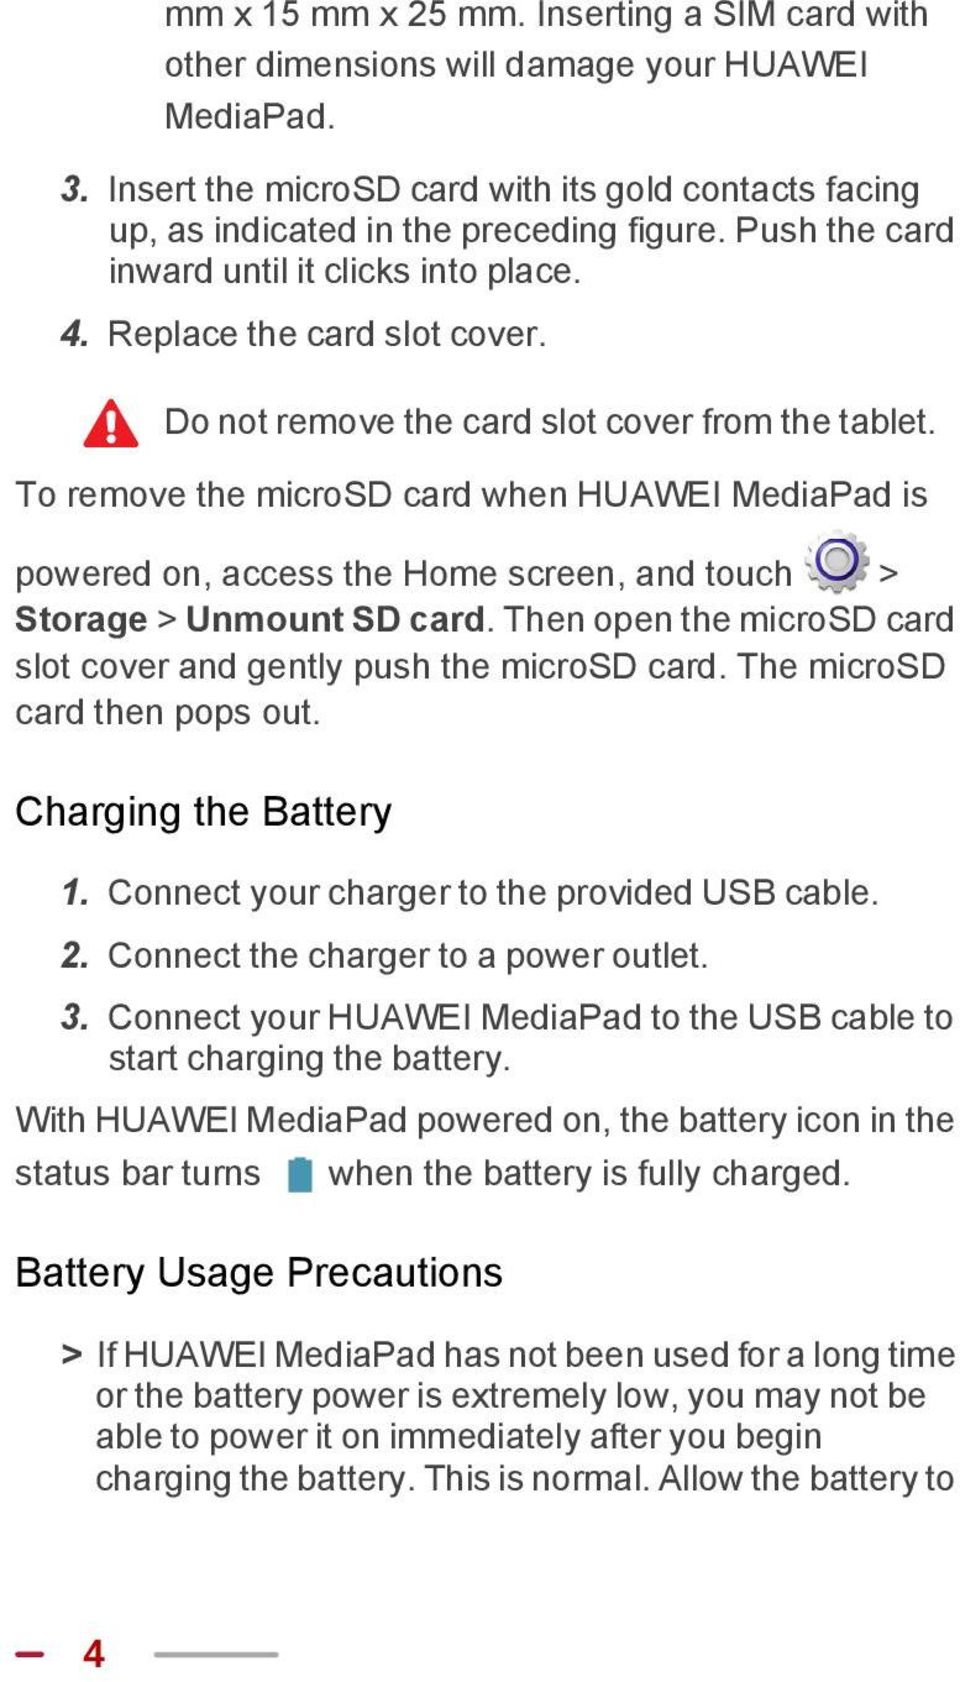 To remove the microsd card when HUAWEI MediaPad is powered on, access the Home screen, and touch > Storage > Unmount SD card. Then open the microsd card slot cover and gently push the microsd card.